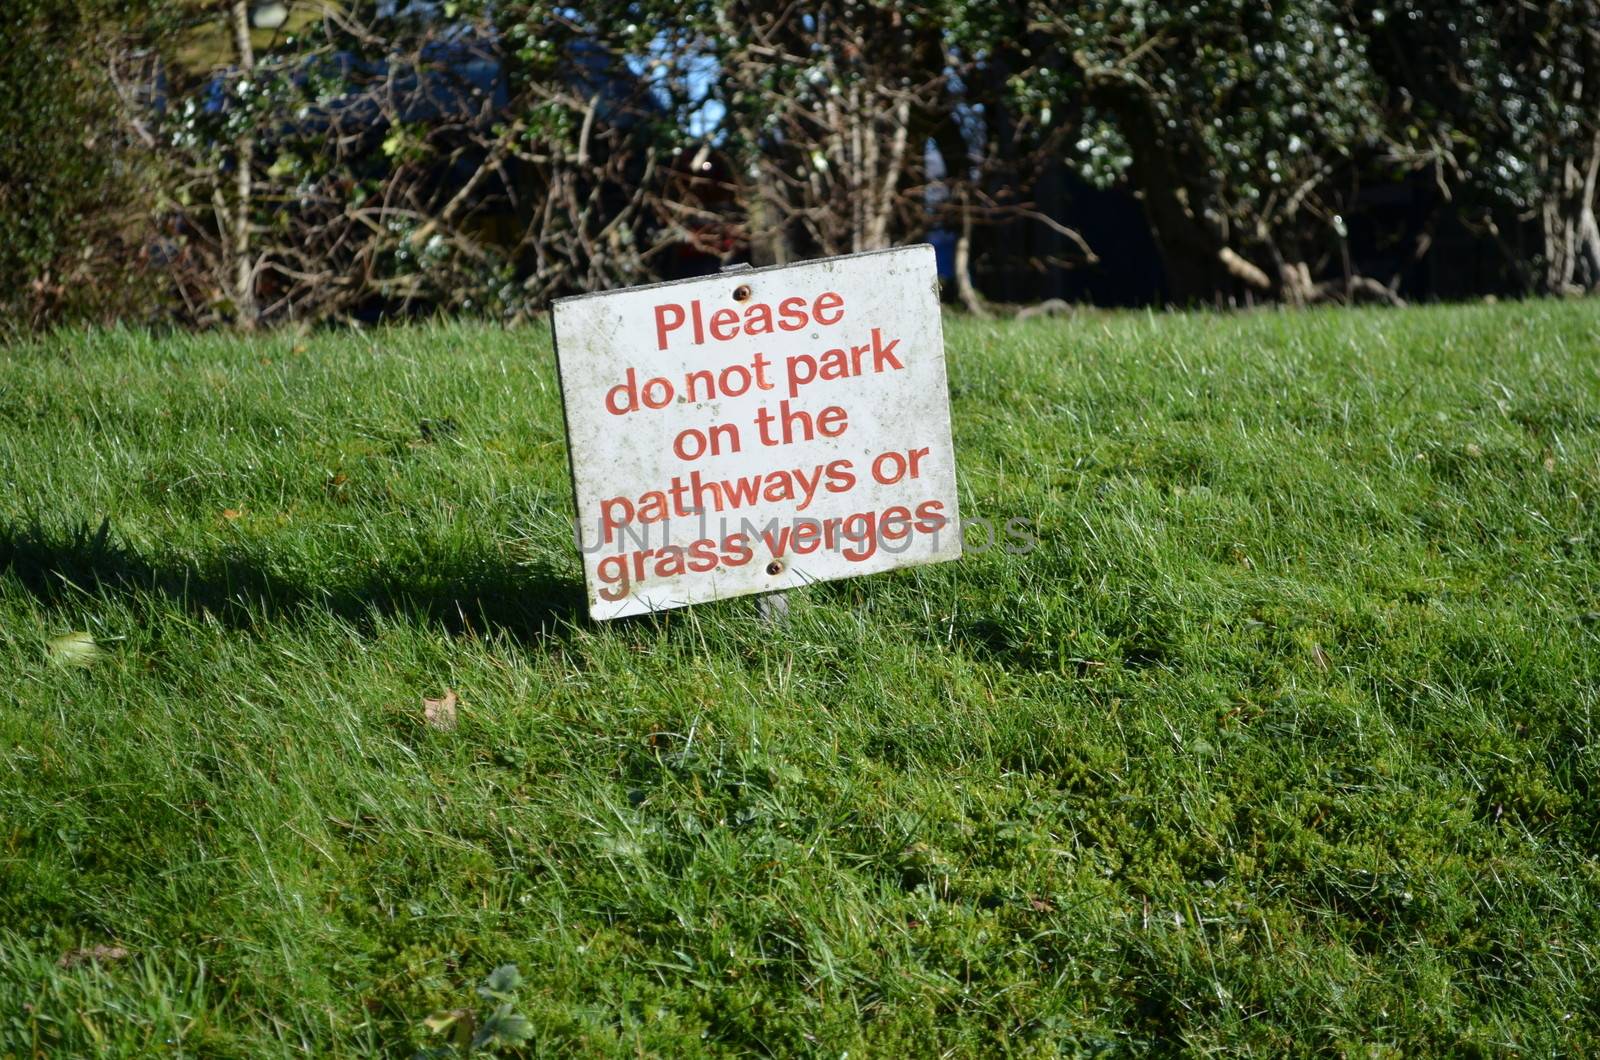 No parking sign on a verge beside a pathway asking for road users not to park on the grass.